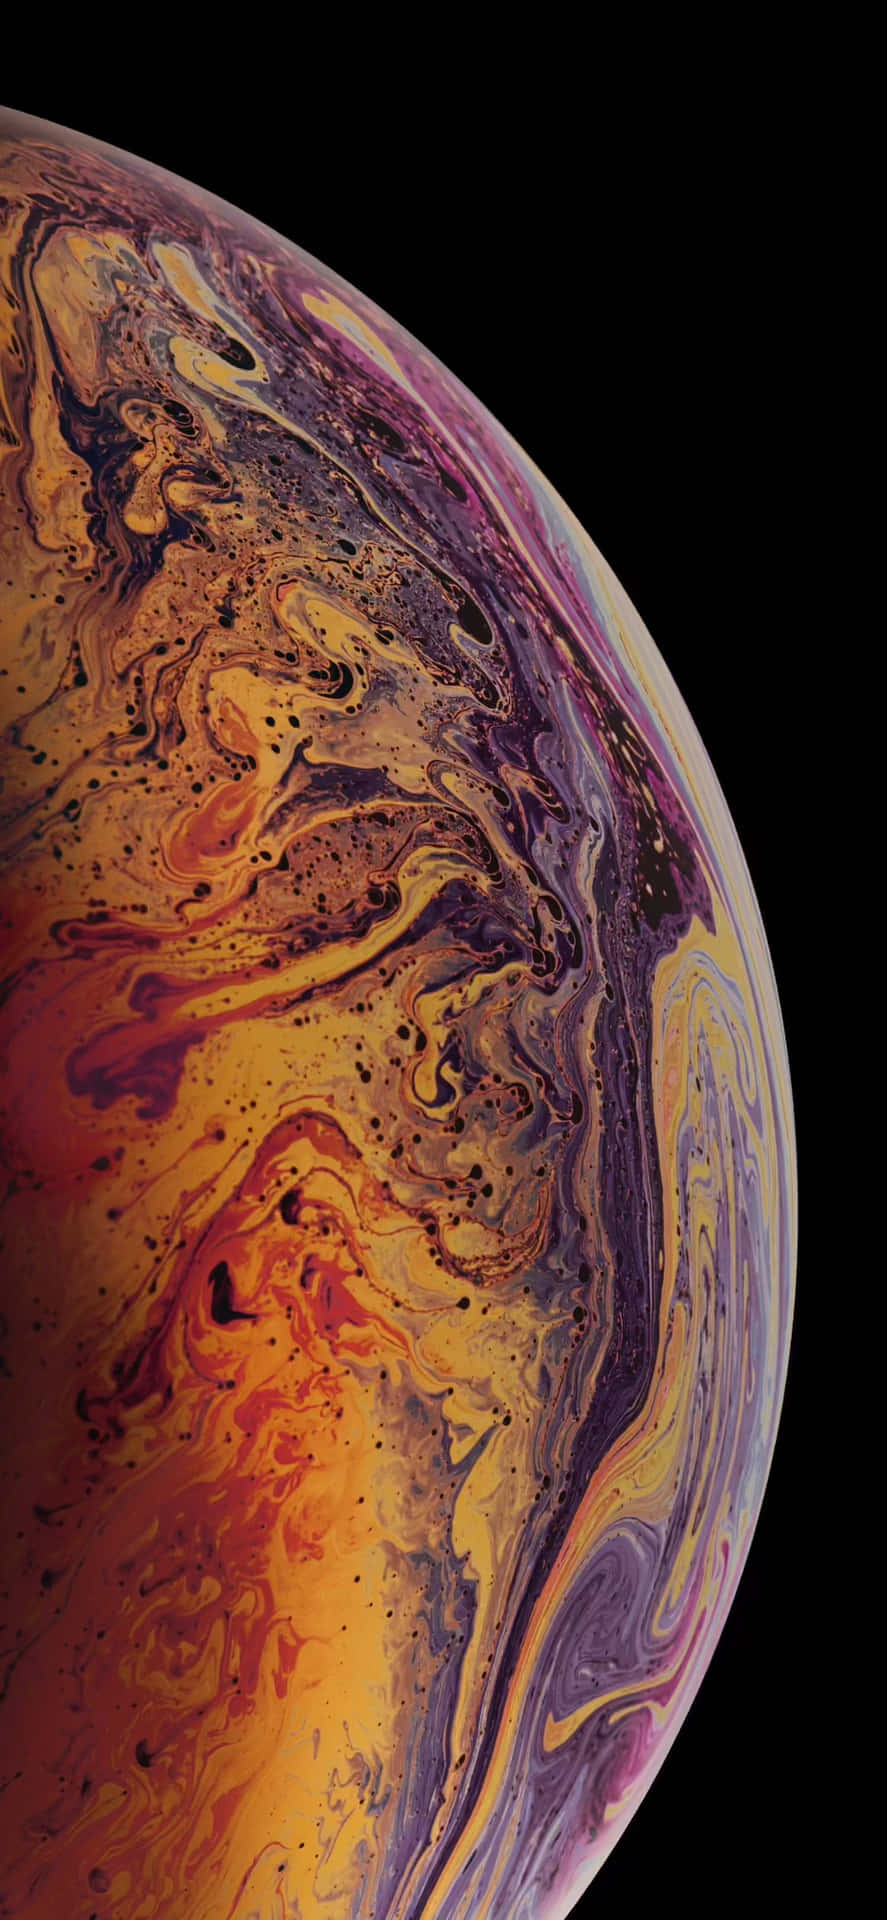 Free Iphone Earth Wallpaper Downloads, [100+] Iphone Earth Wallpapers for  FREE 